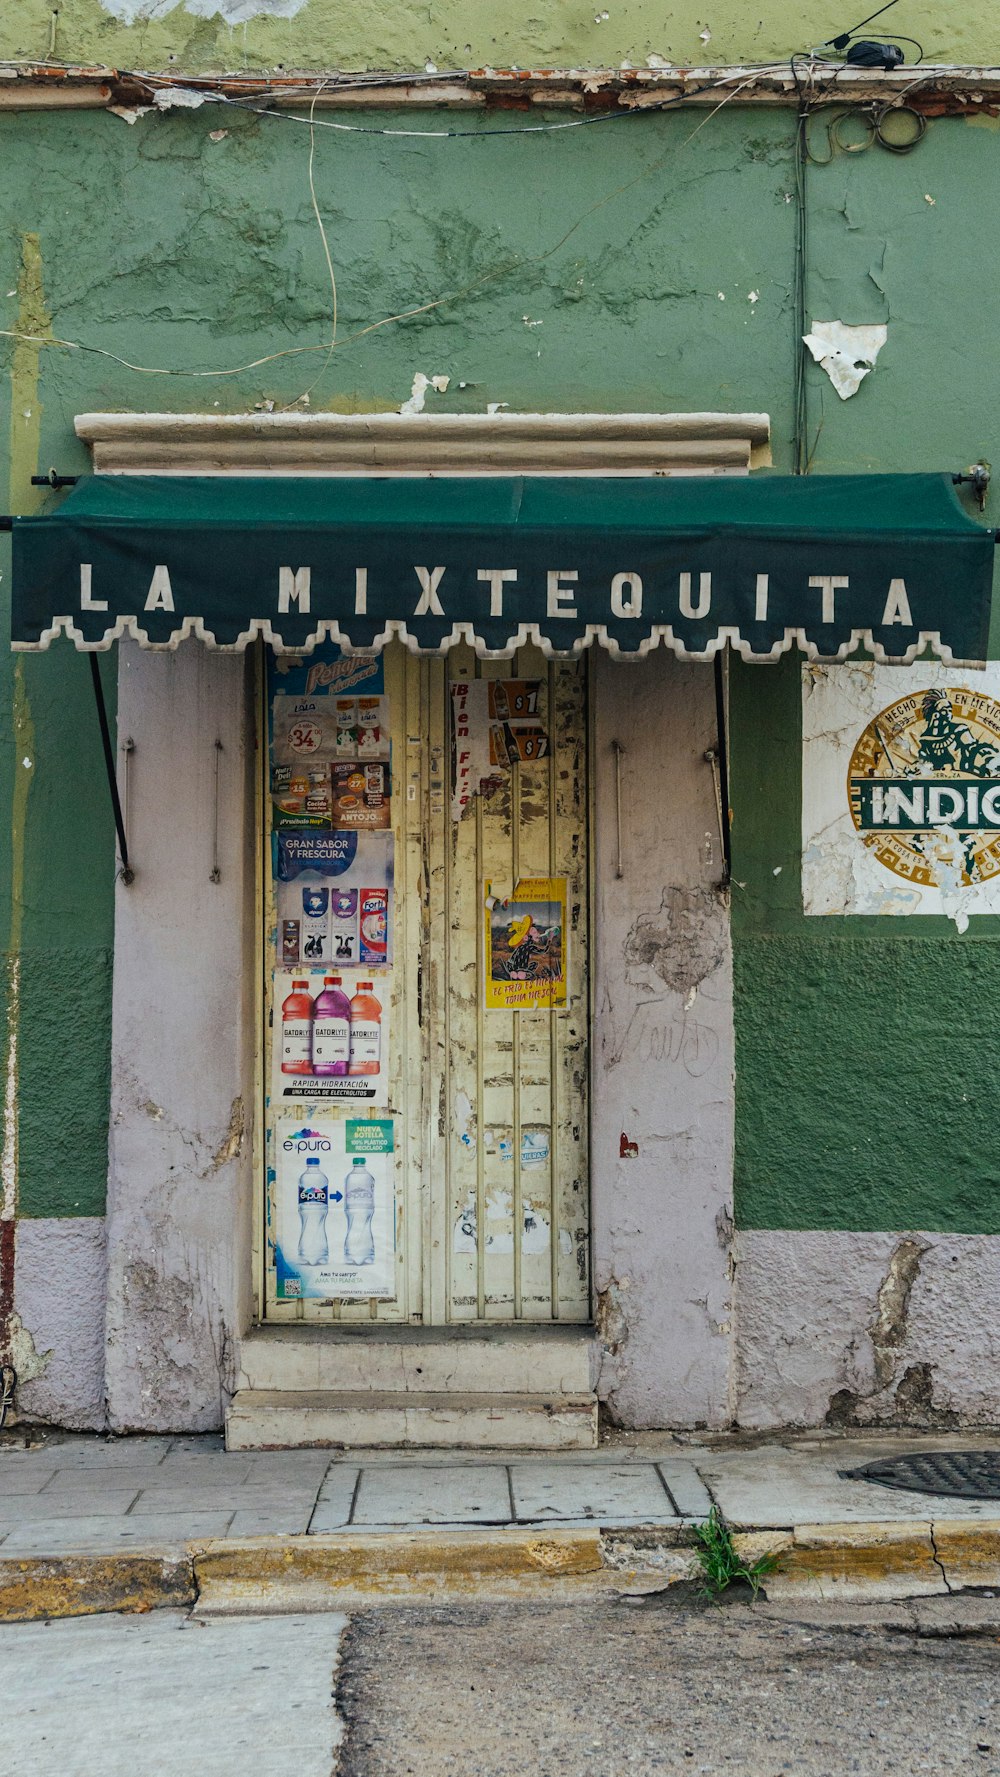 a green and white building with a sign that says la mixtequata